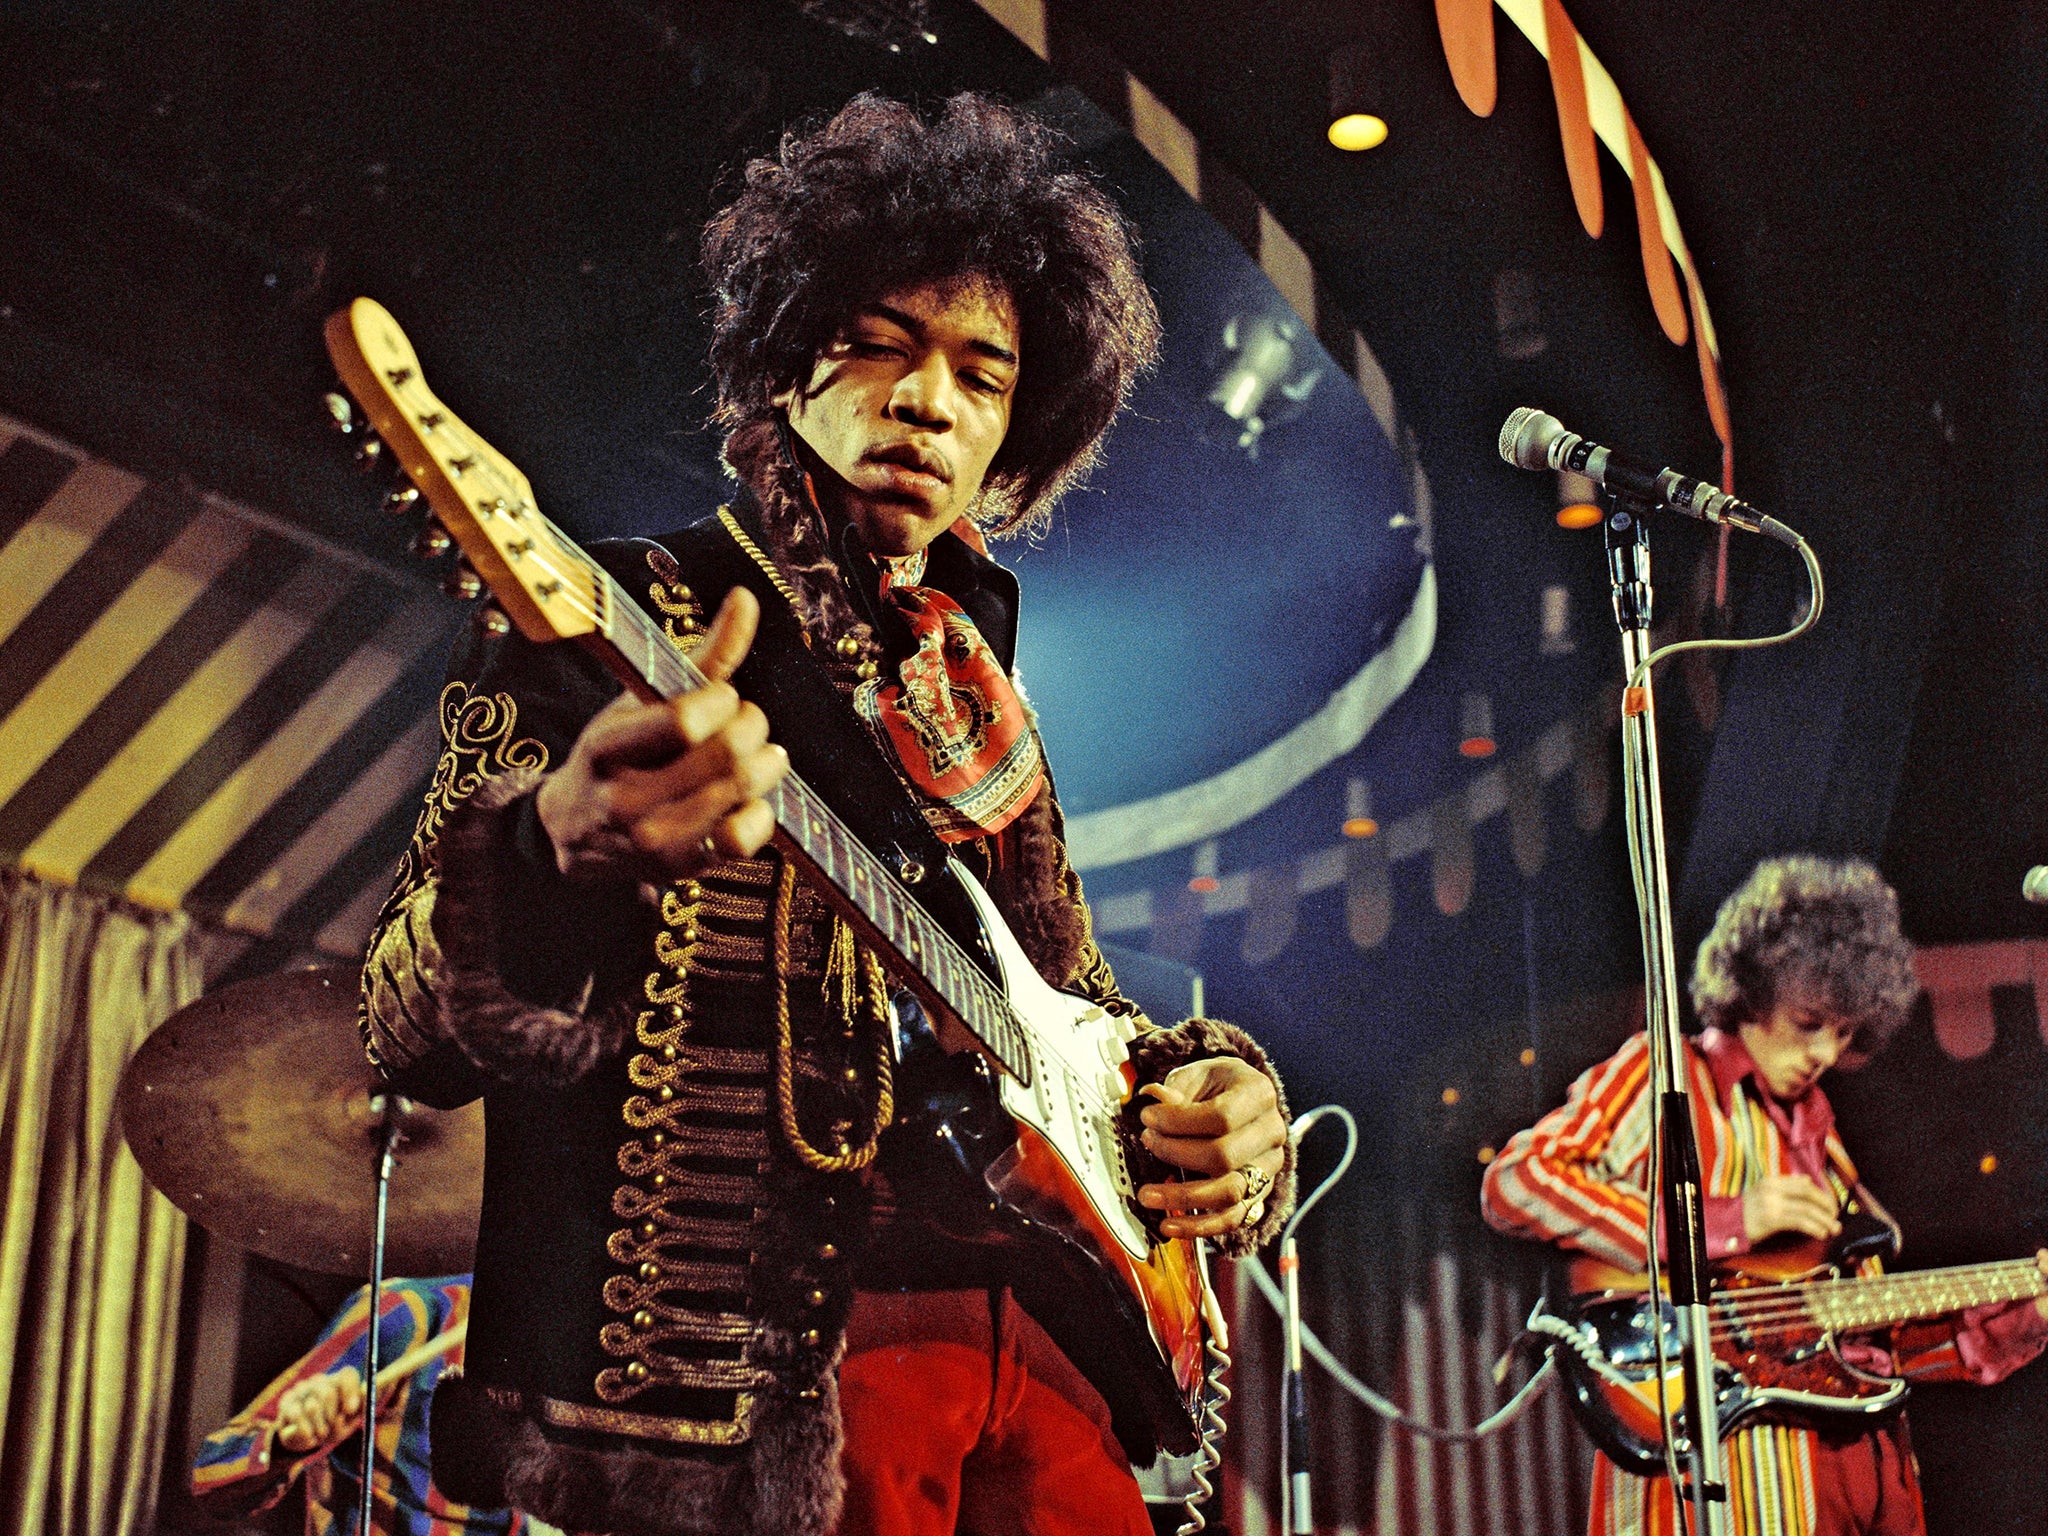 Sky Arts explores the history of electronic music in a new documentary: Jimi Hendrix at the Marquee Club, London in 1967